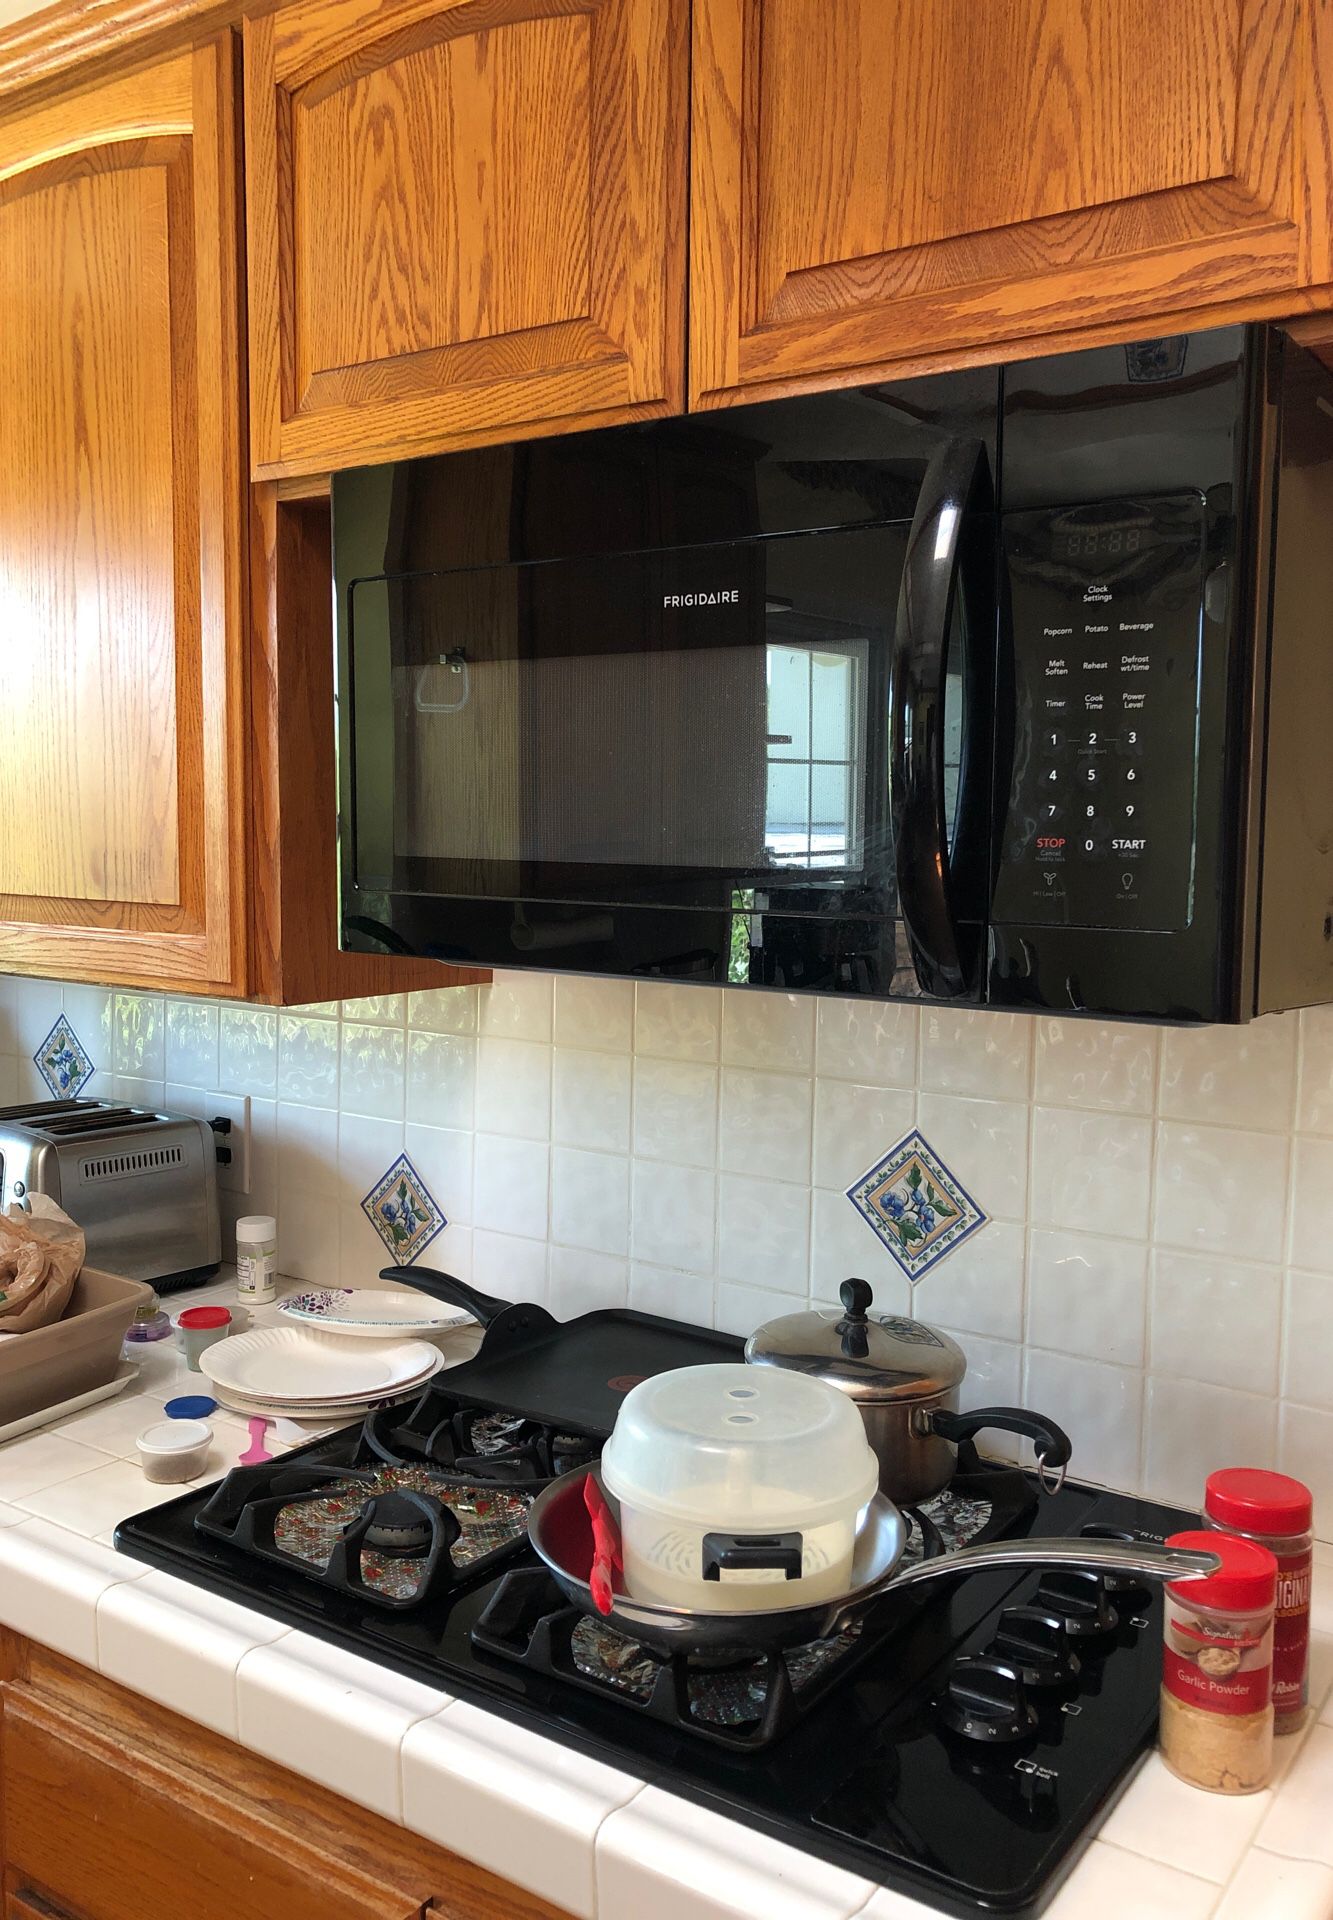 Frigidaire 1 year old microwave